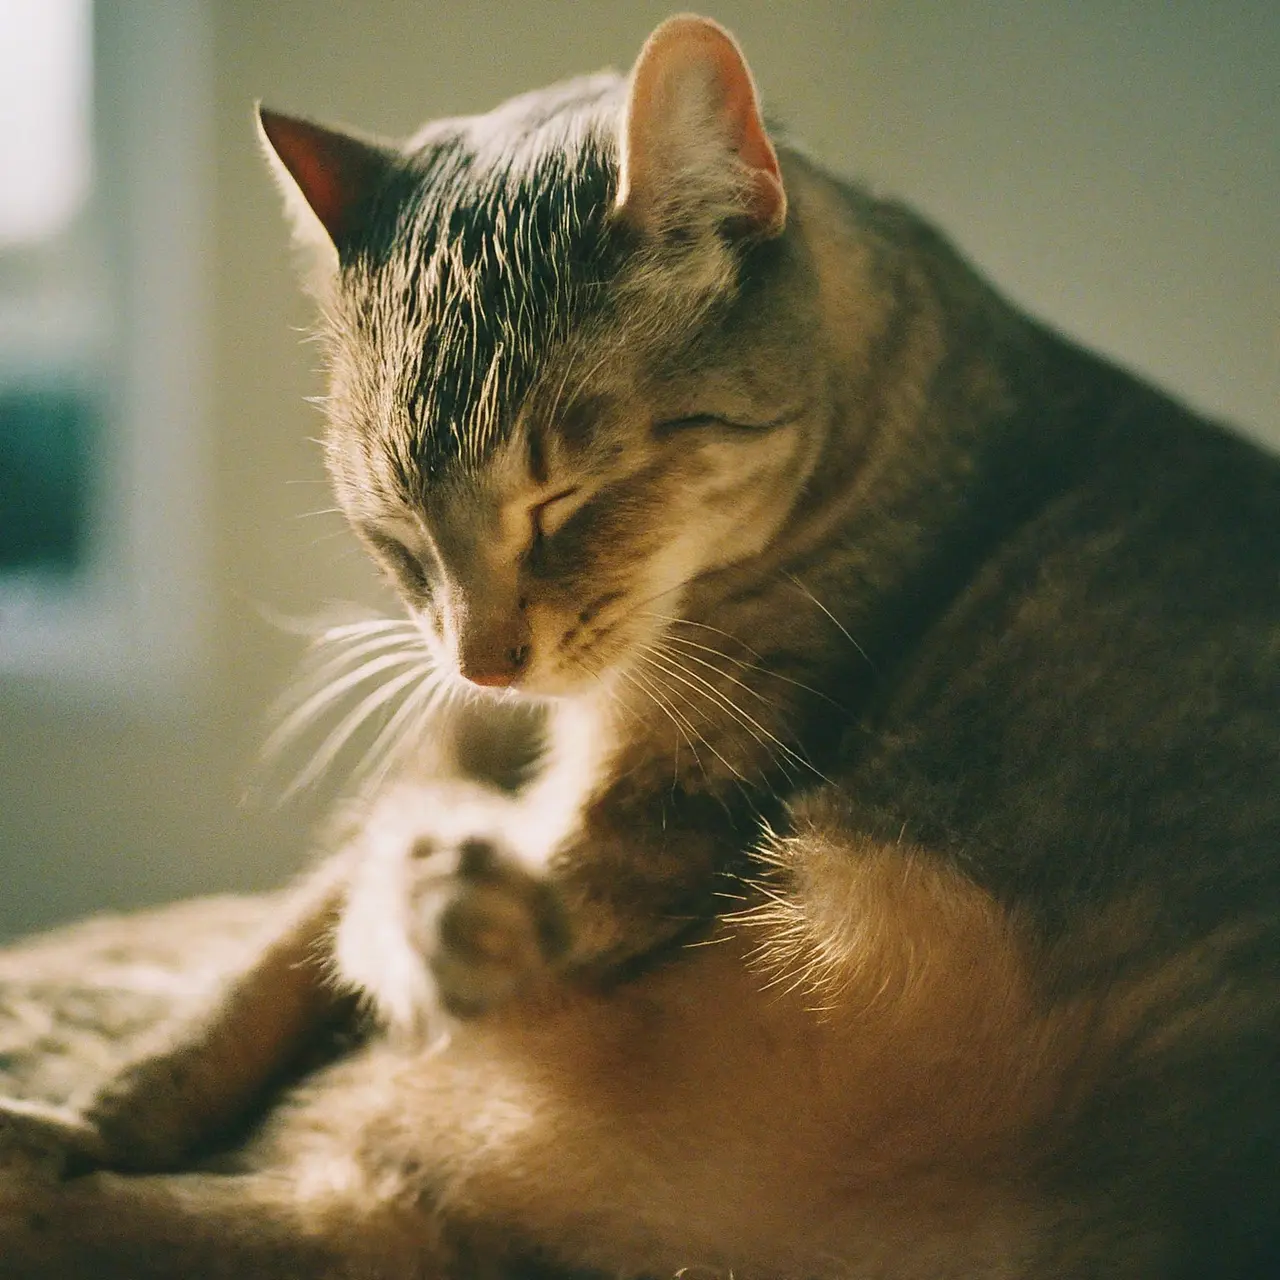 A cat enjoying a relaxing grooming session. 35mm stock photo